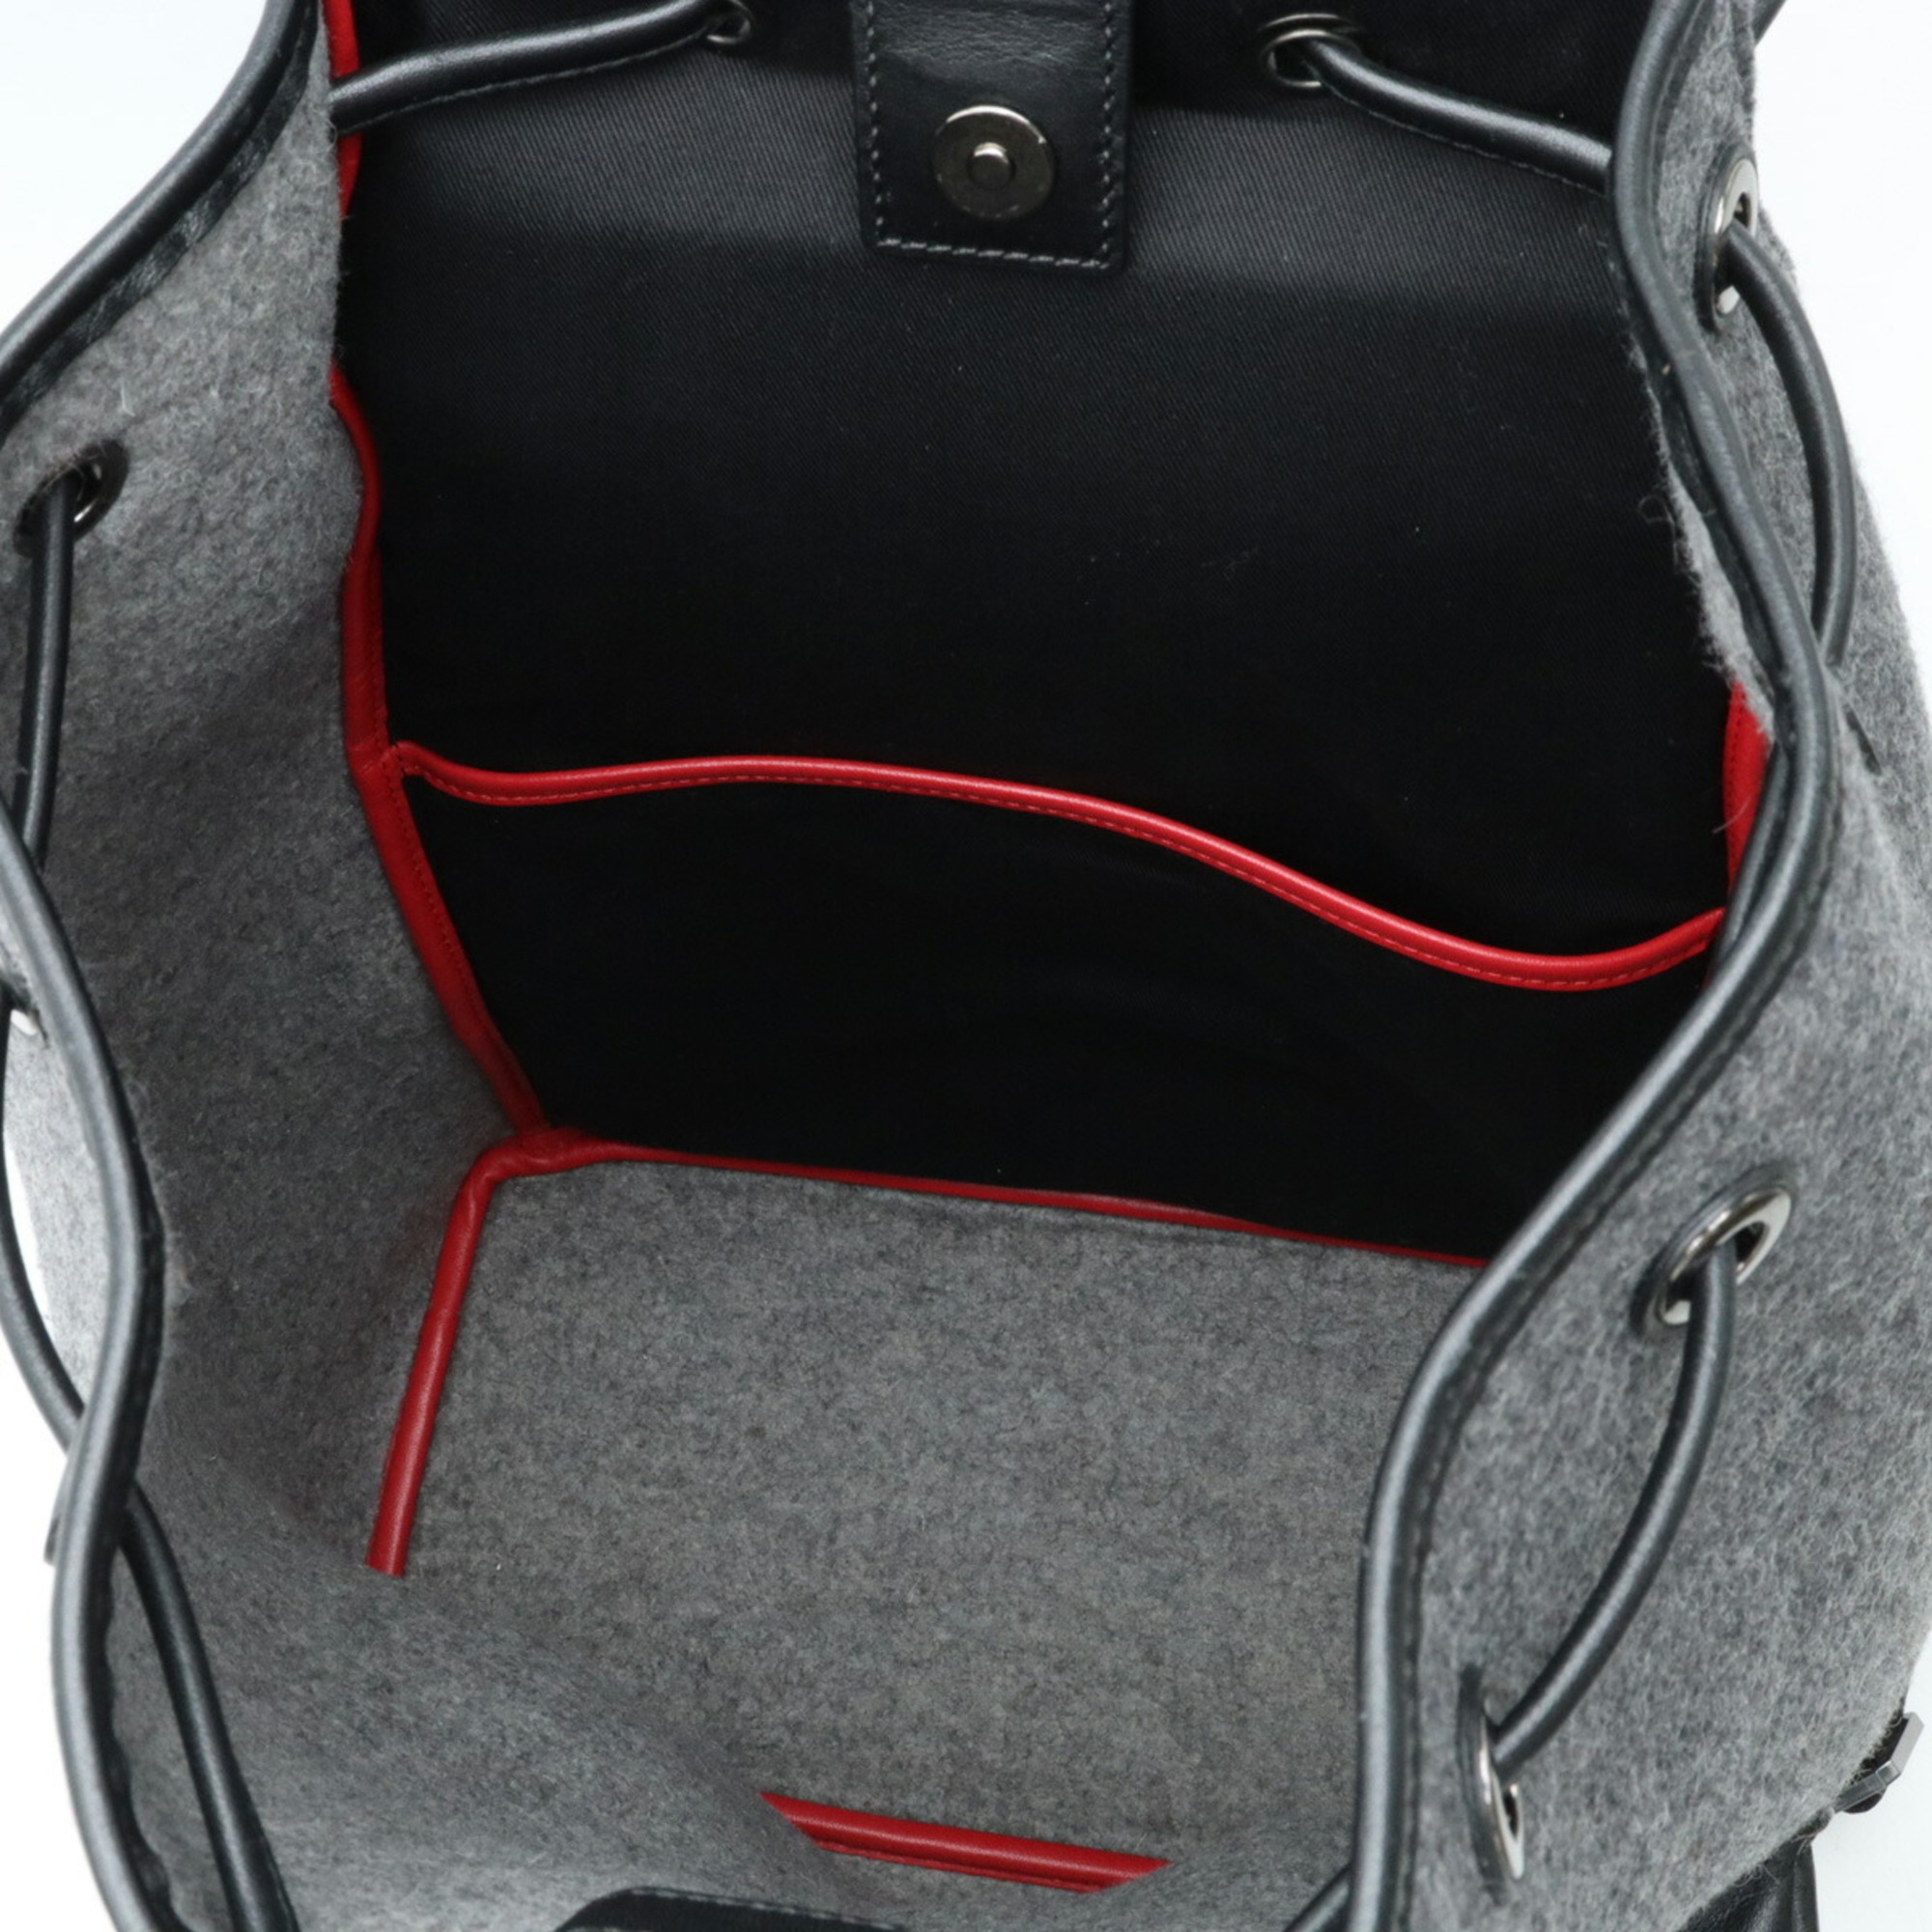 MCM Stadt Loden Backpack Wool Leather Grey Black Red MUK8ASD09EP001